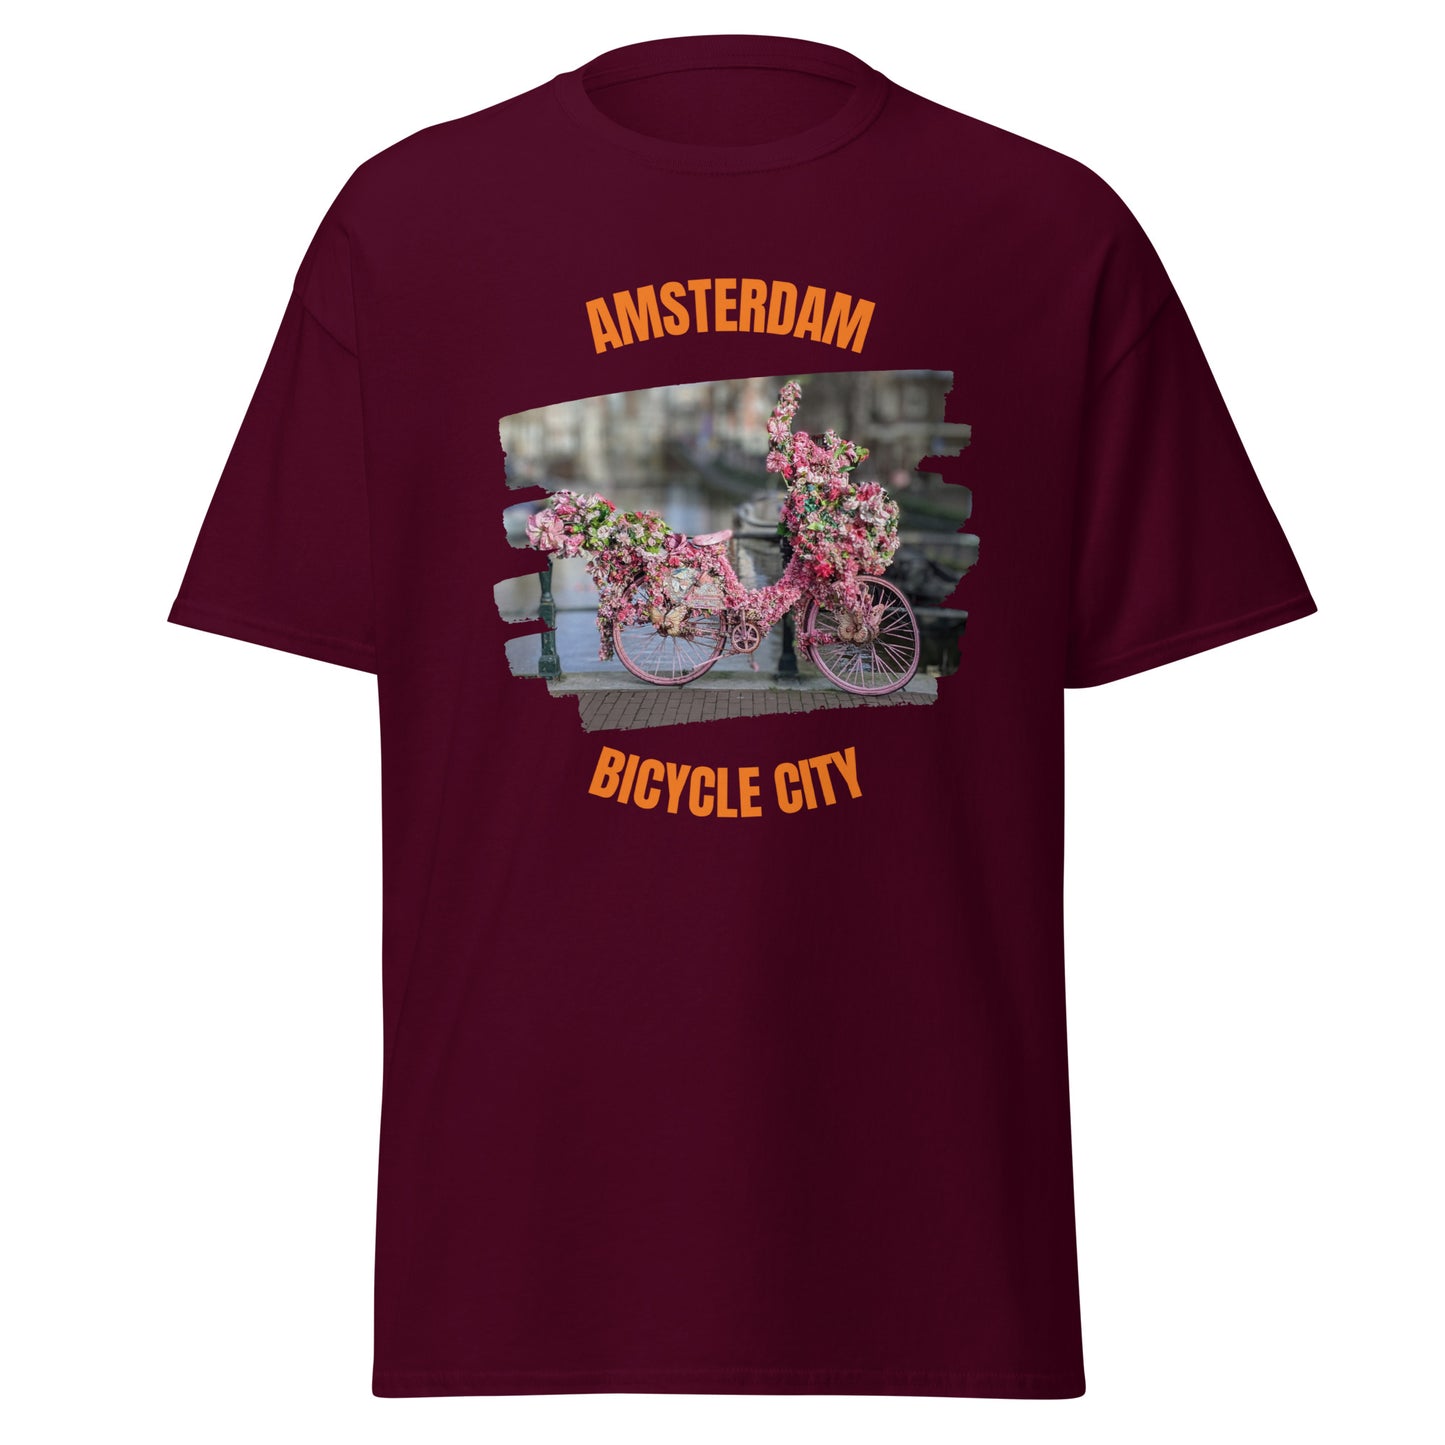 A charming unisex t-shirt with a stylish Amsterdam bicycle decorated with vibrant flowers